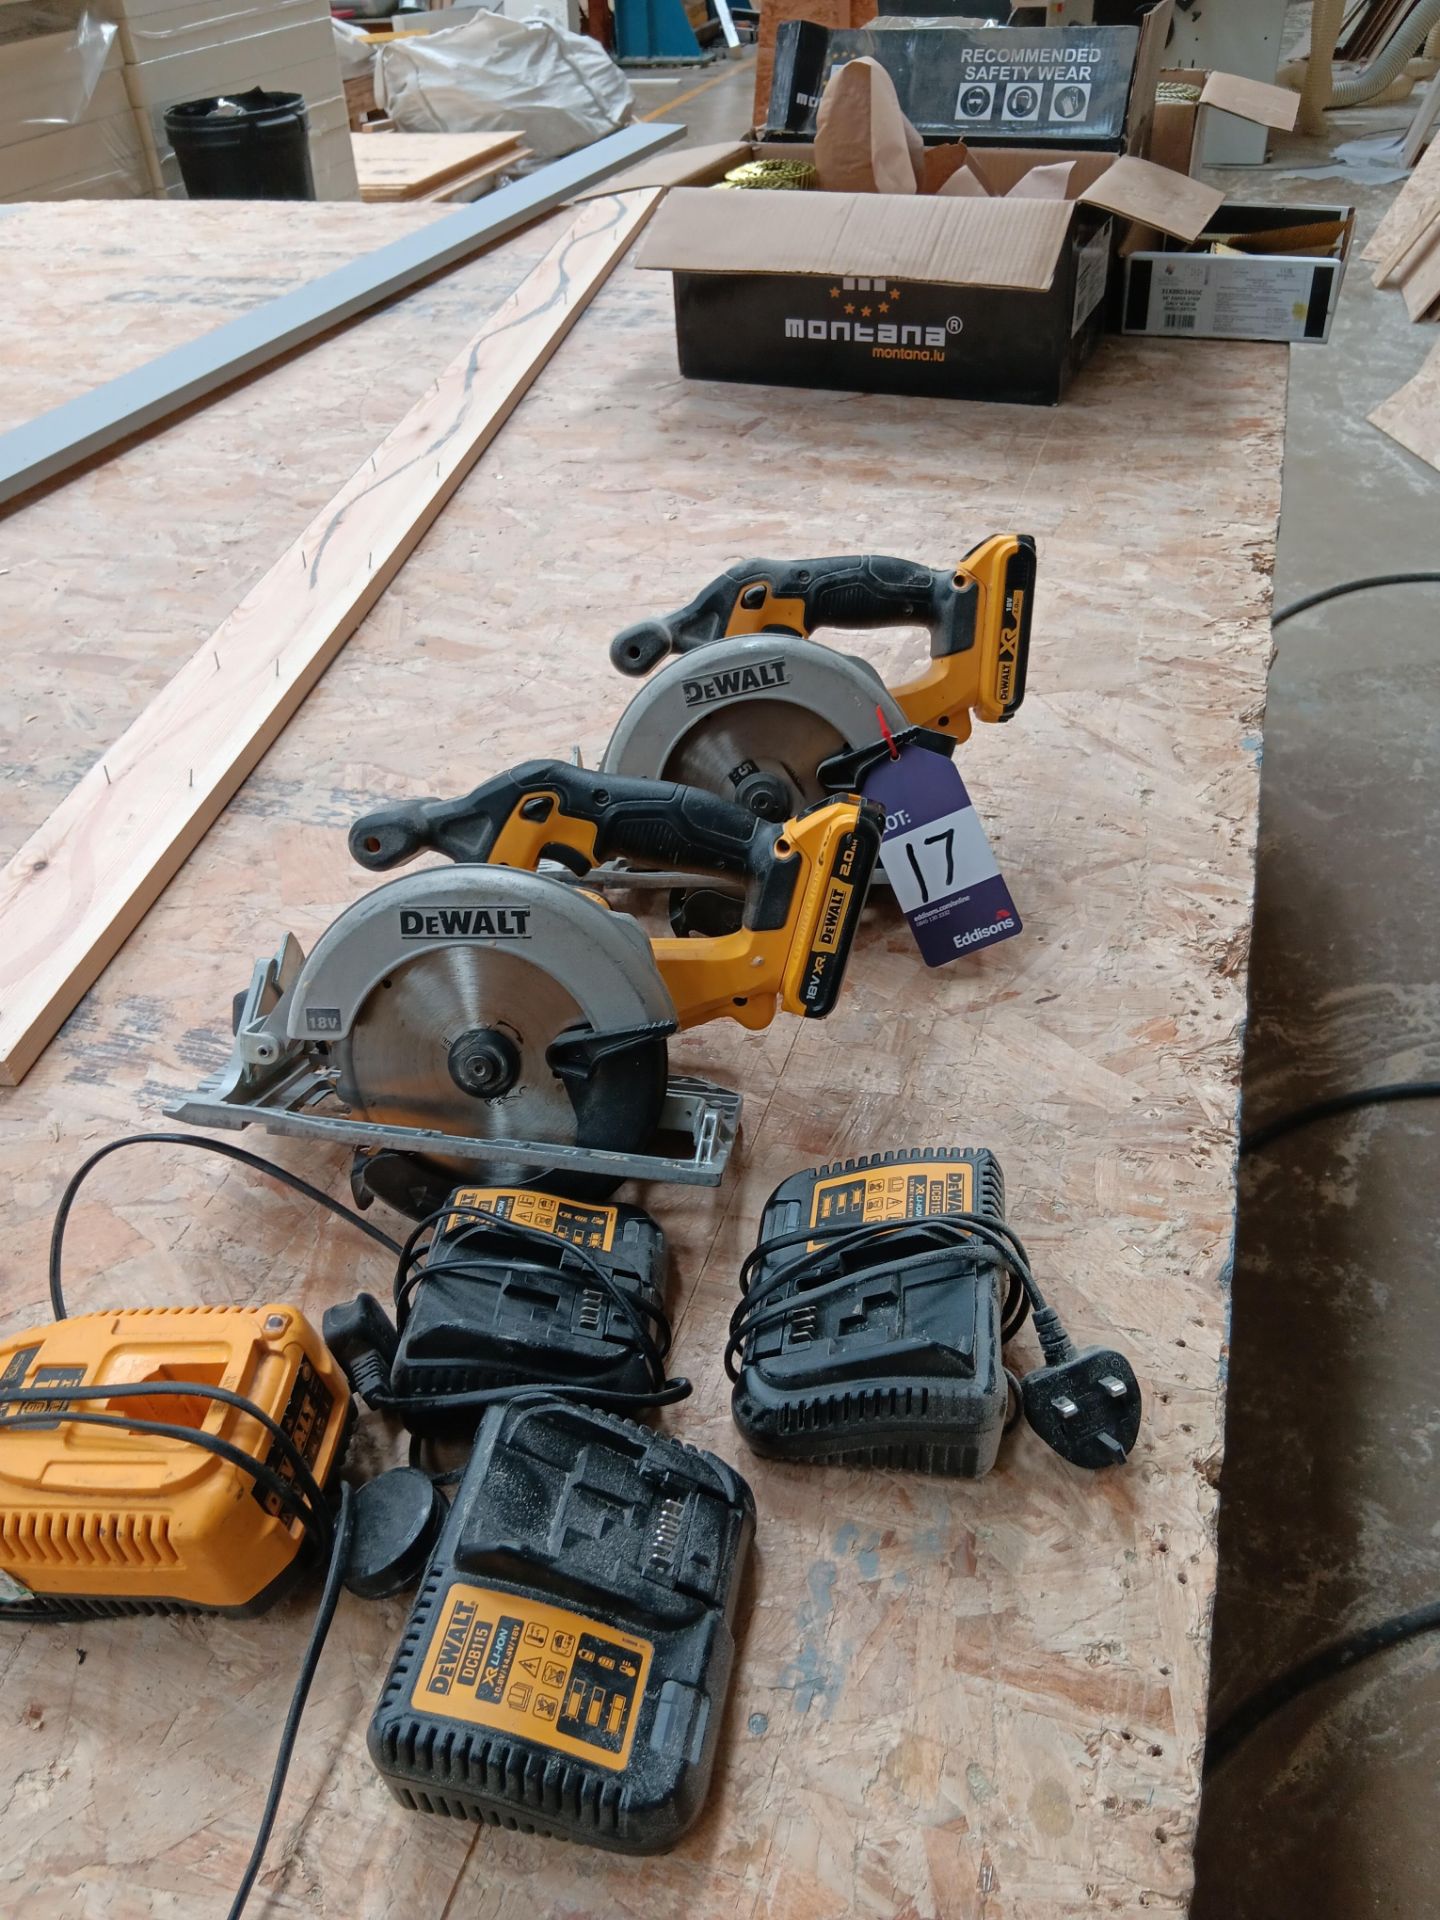 2 Dewalt DOS391 18v cordless circular saw with 4 various chargers